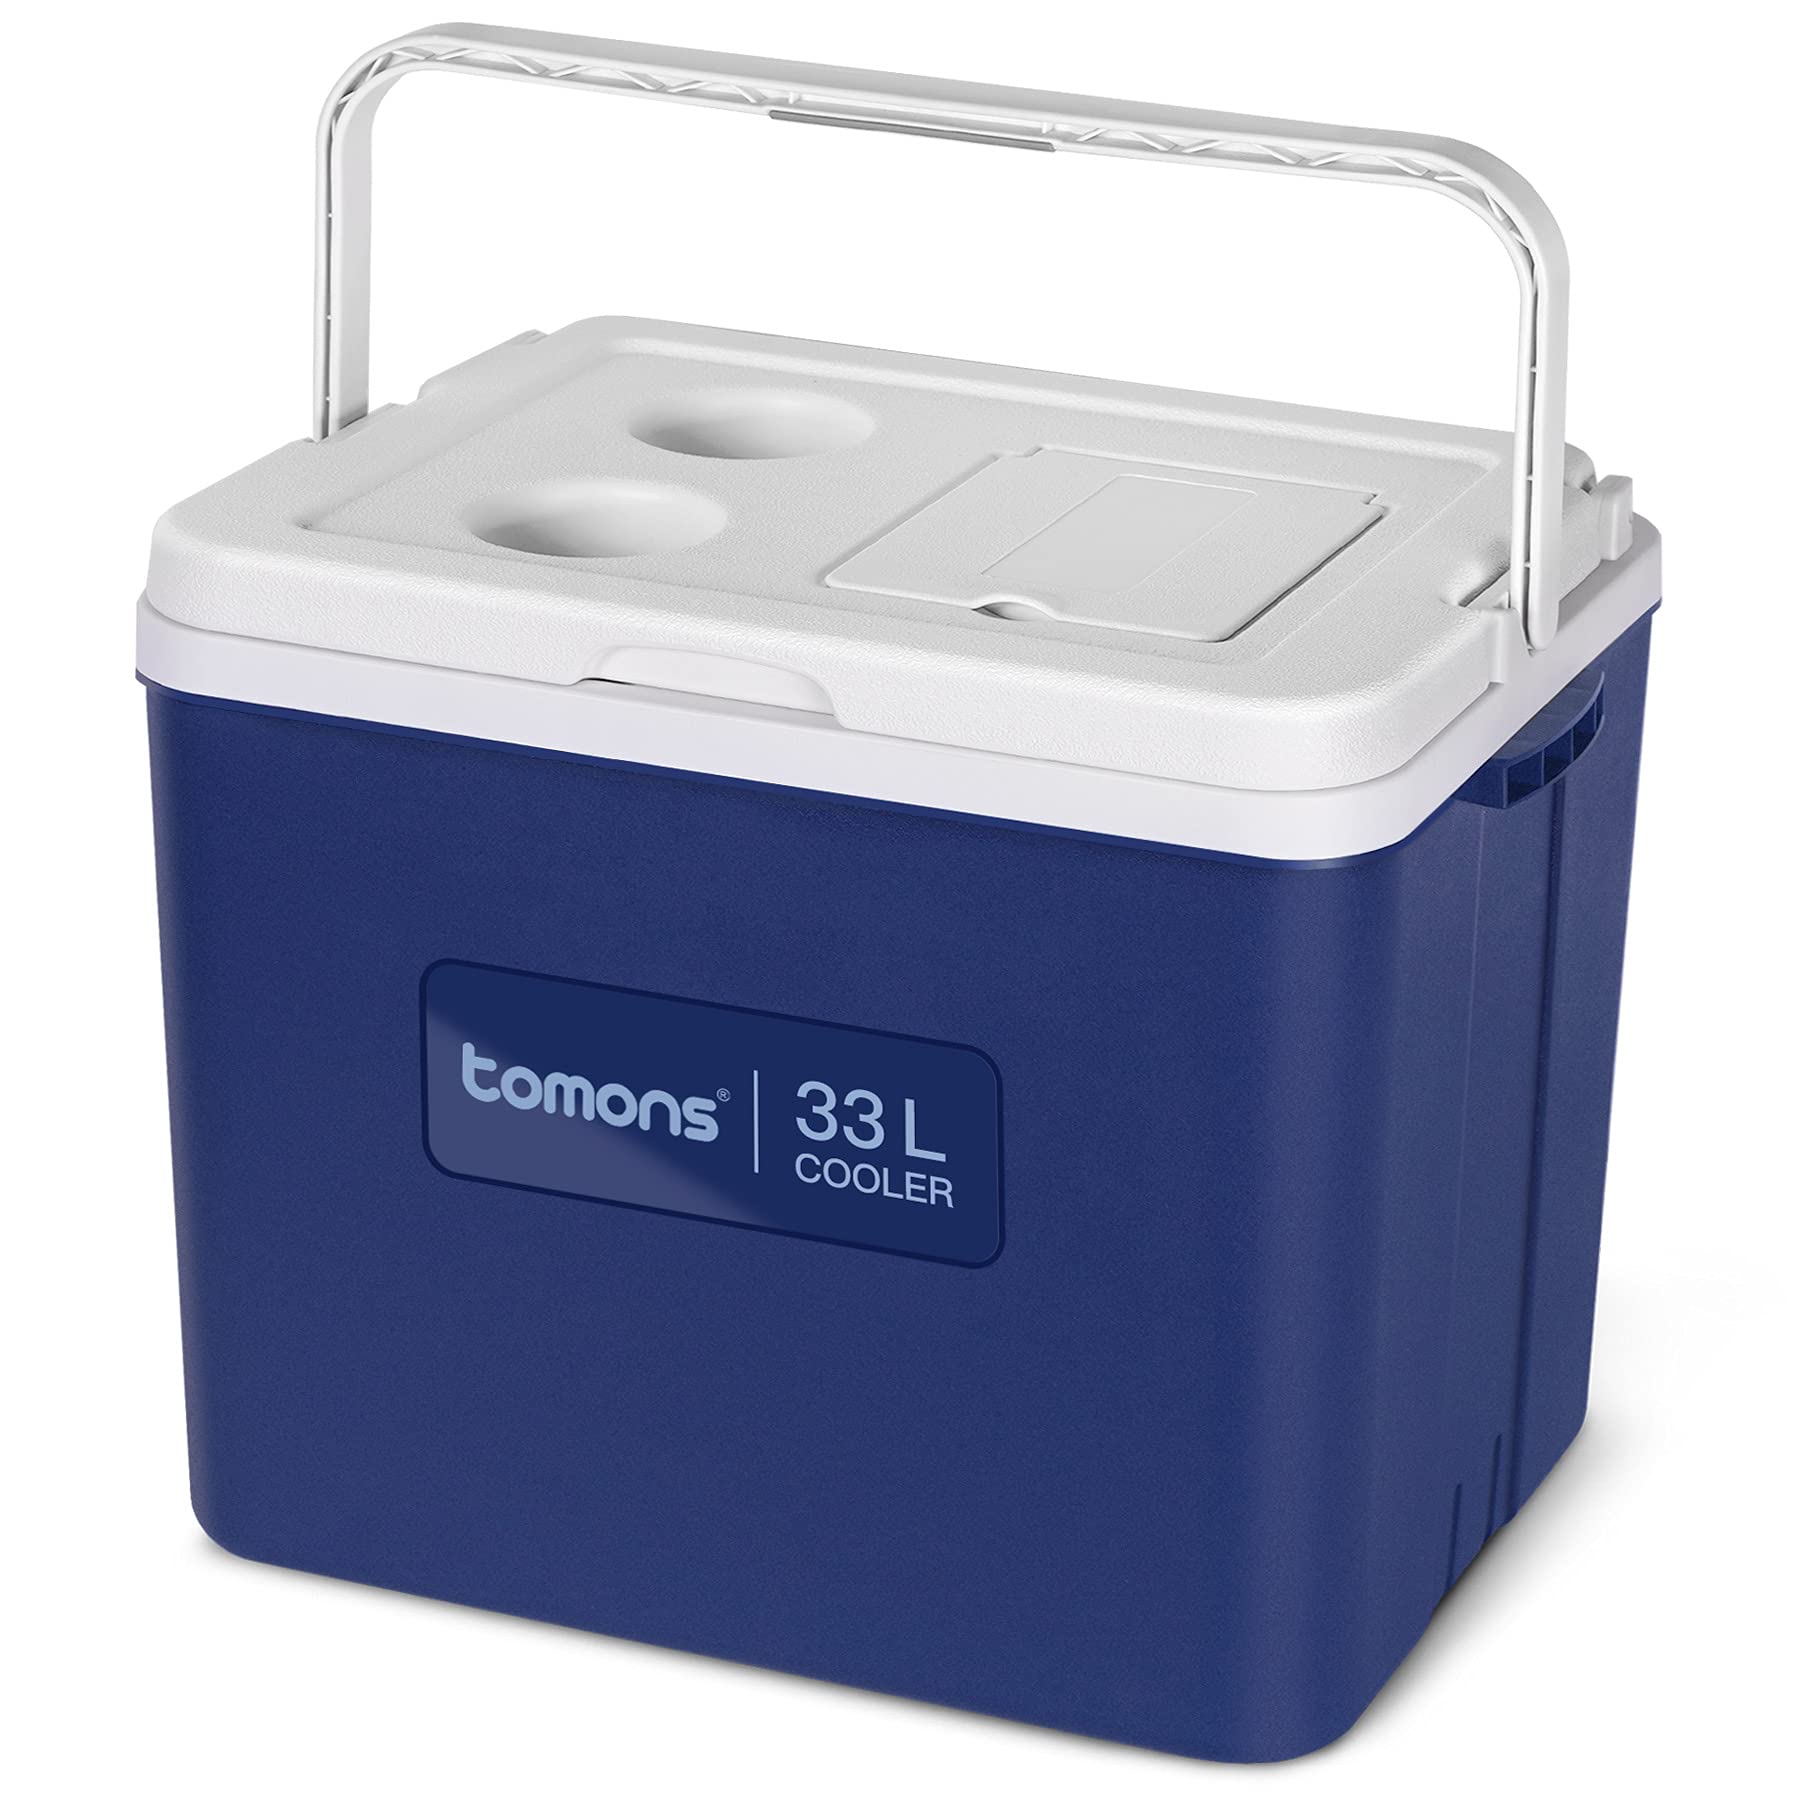 Tomons Cool Box Portable Cooler, 33L Insulated Box, with Handle, for Car, Truck, Boat, Outdoor Activities (standard cool box)